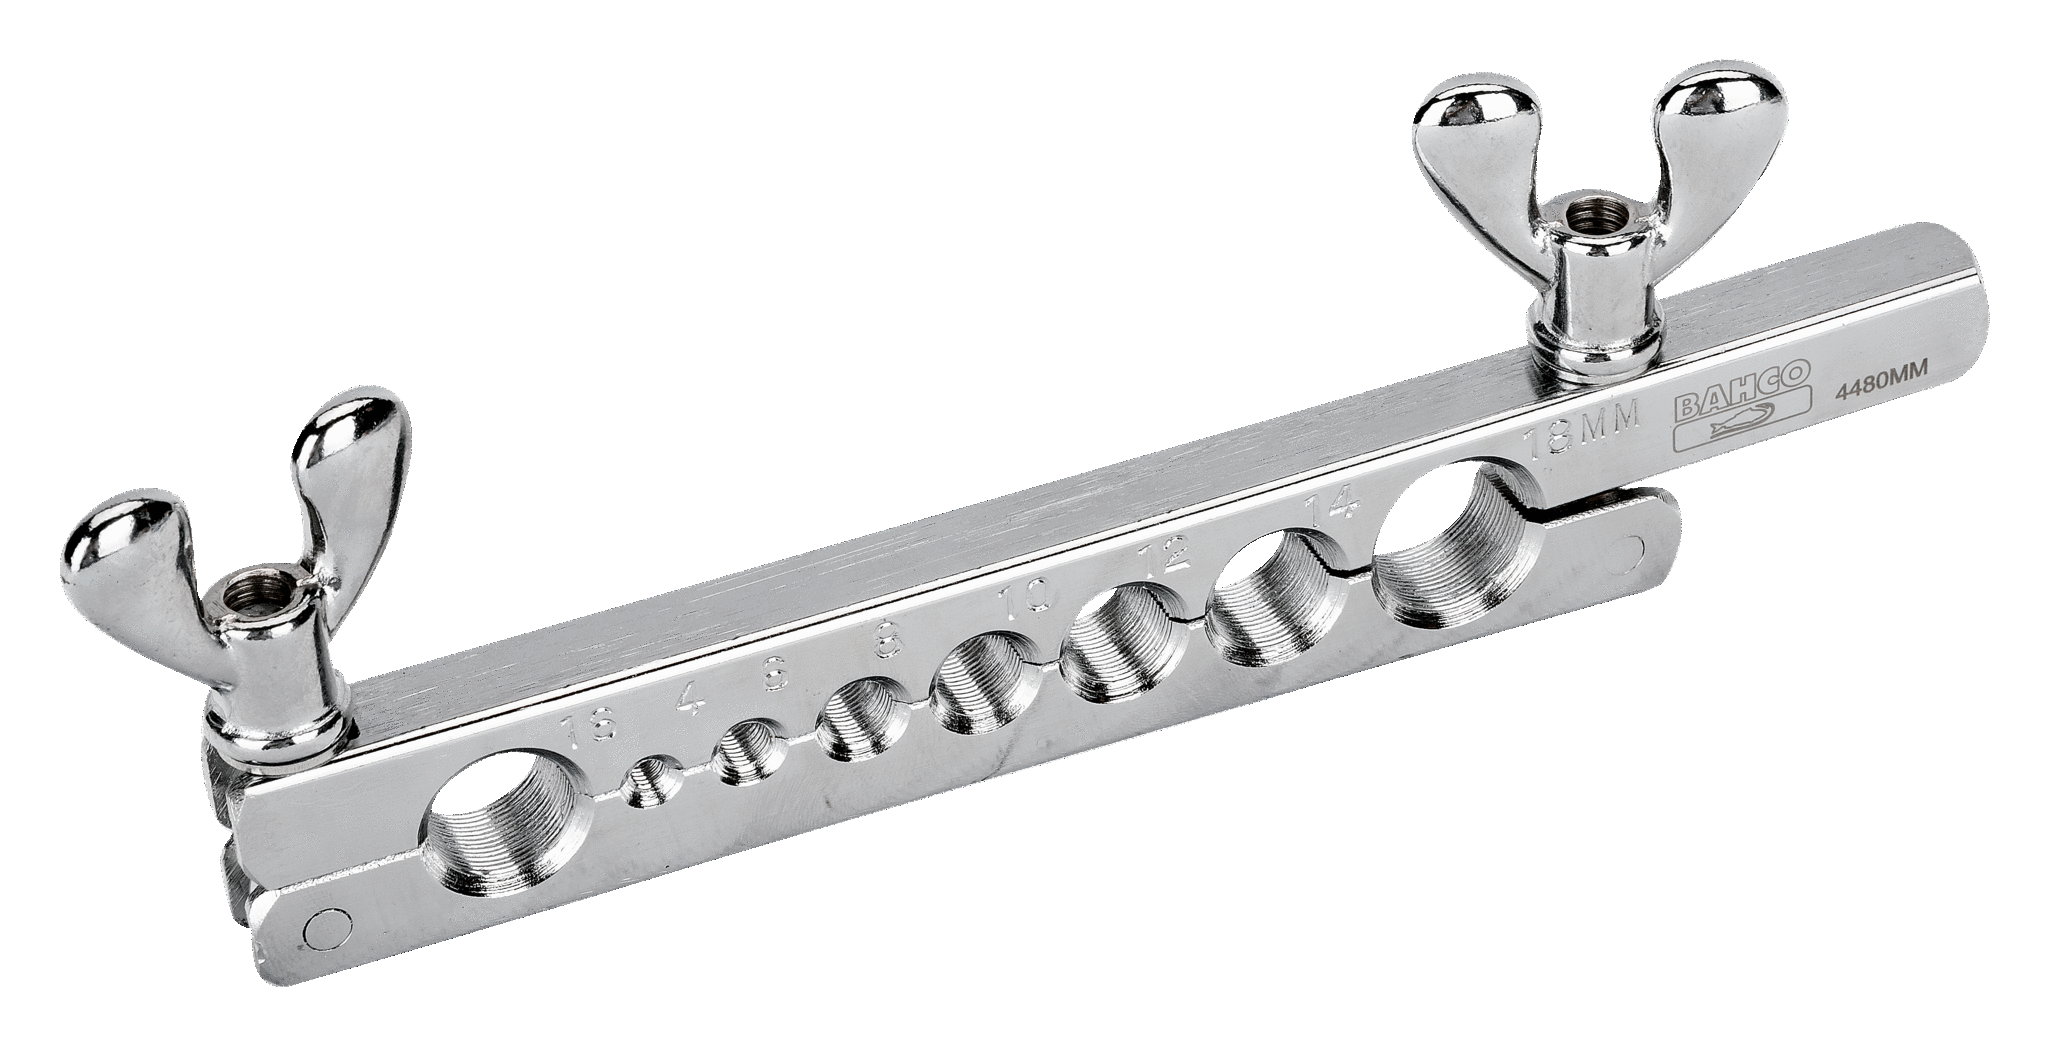 Details about   Flaring Tool Tube Expander Model 92 Exquisite Manual Hardware British System HQ 